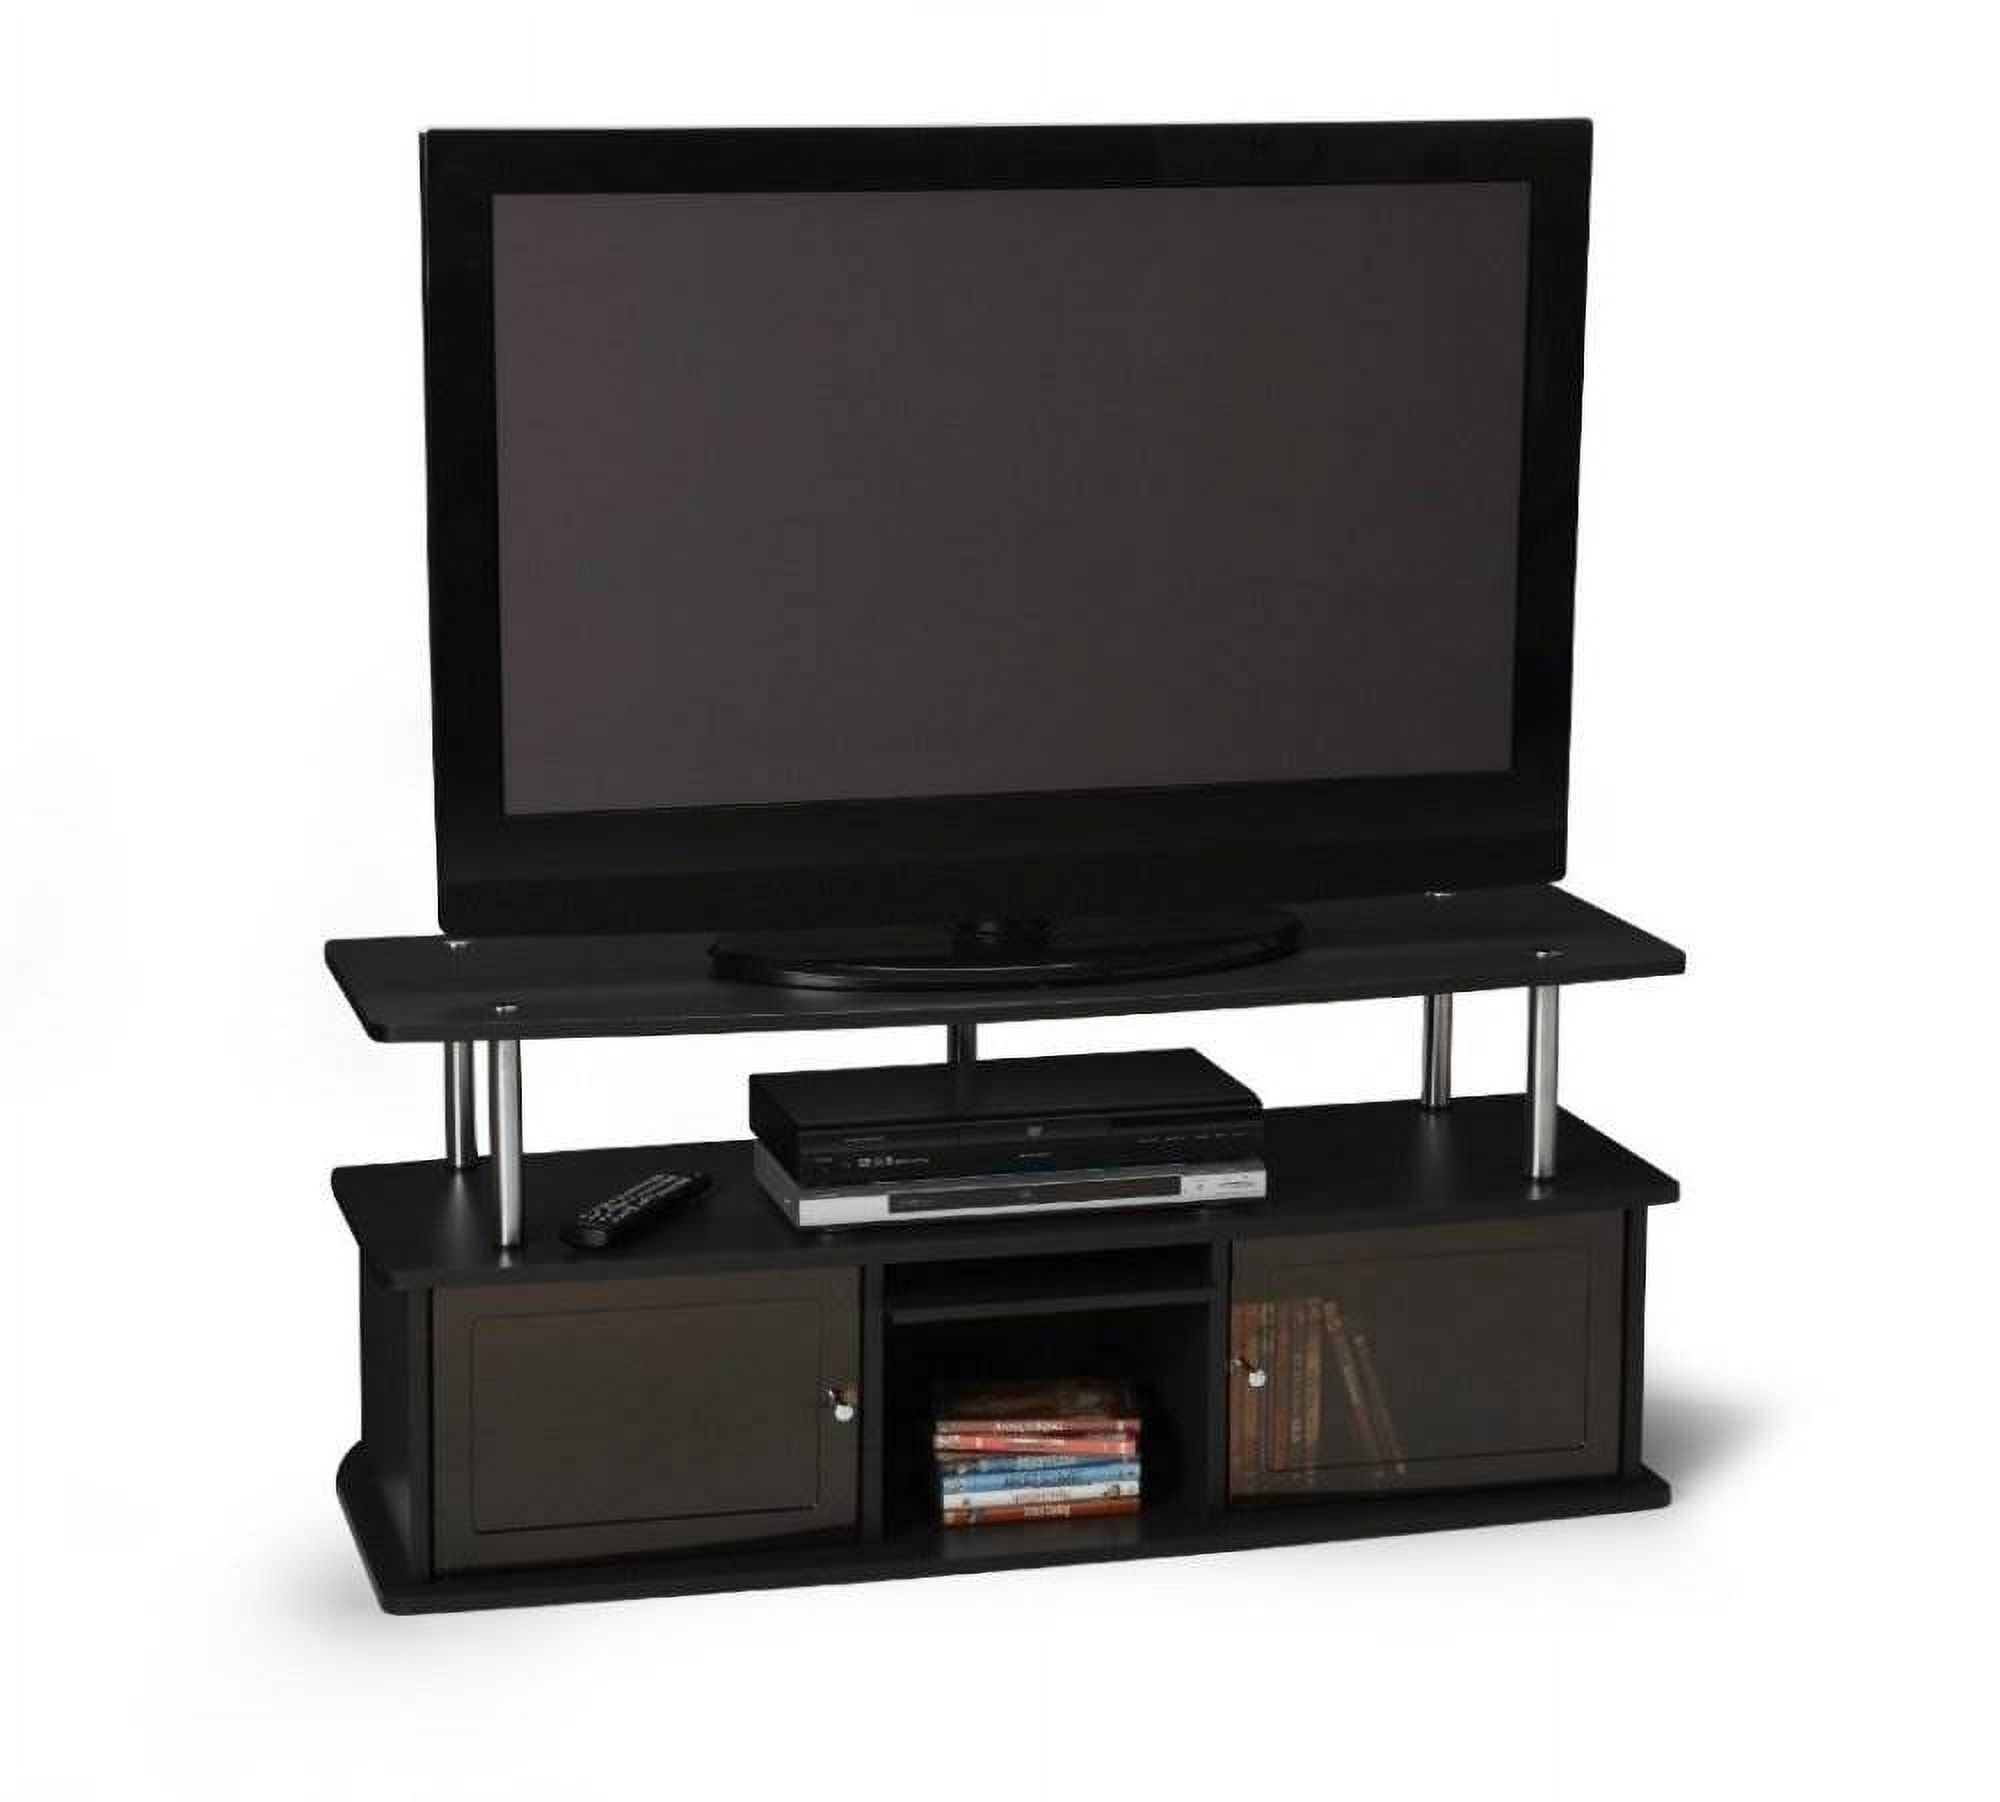 Convenience Concepts Designs2Go Cherry TV Stand with 3 Cabinets for TVs up to 50", Black - image 1 of 5